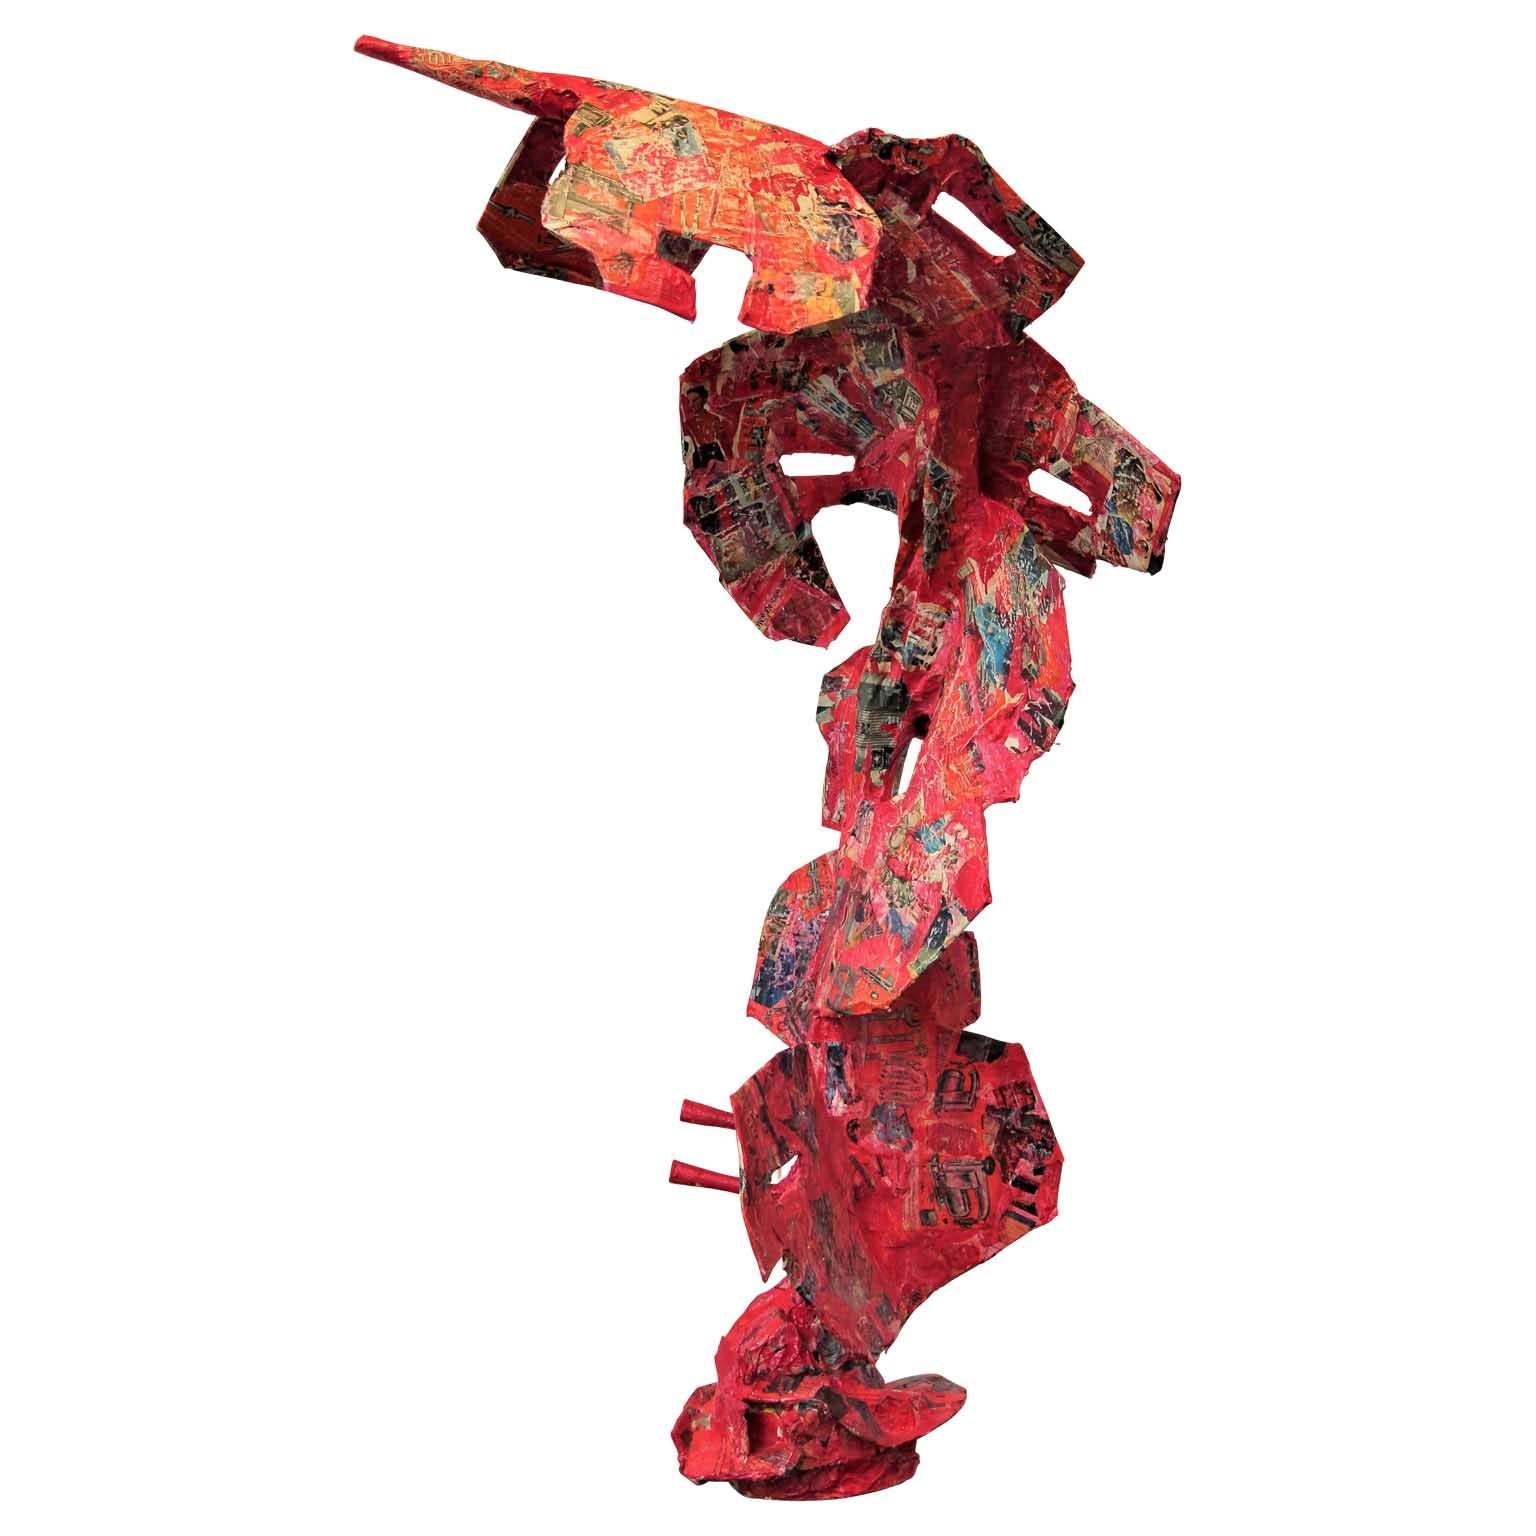 Brent Fogt Abstract Sculpture - “Culture Counter” Red Abstract Contemporary Mixed Media Collage Sculpture